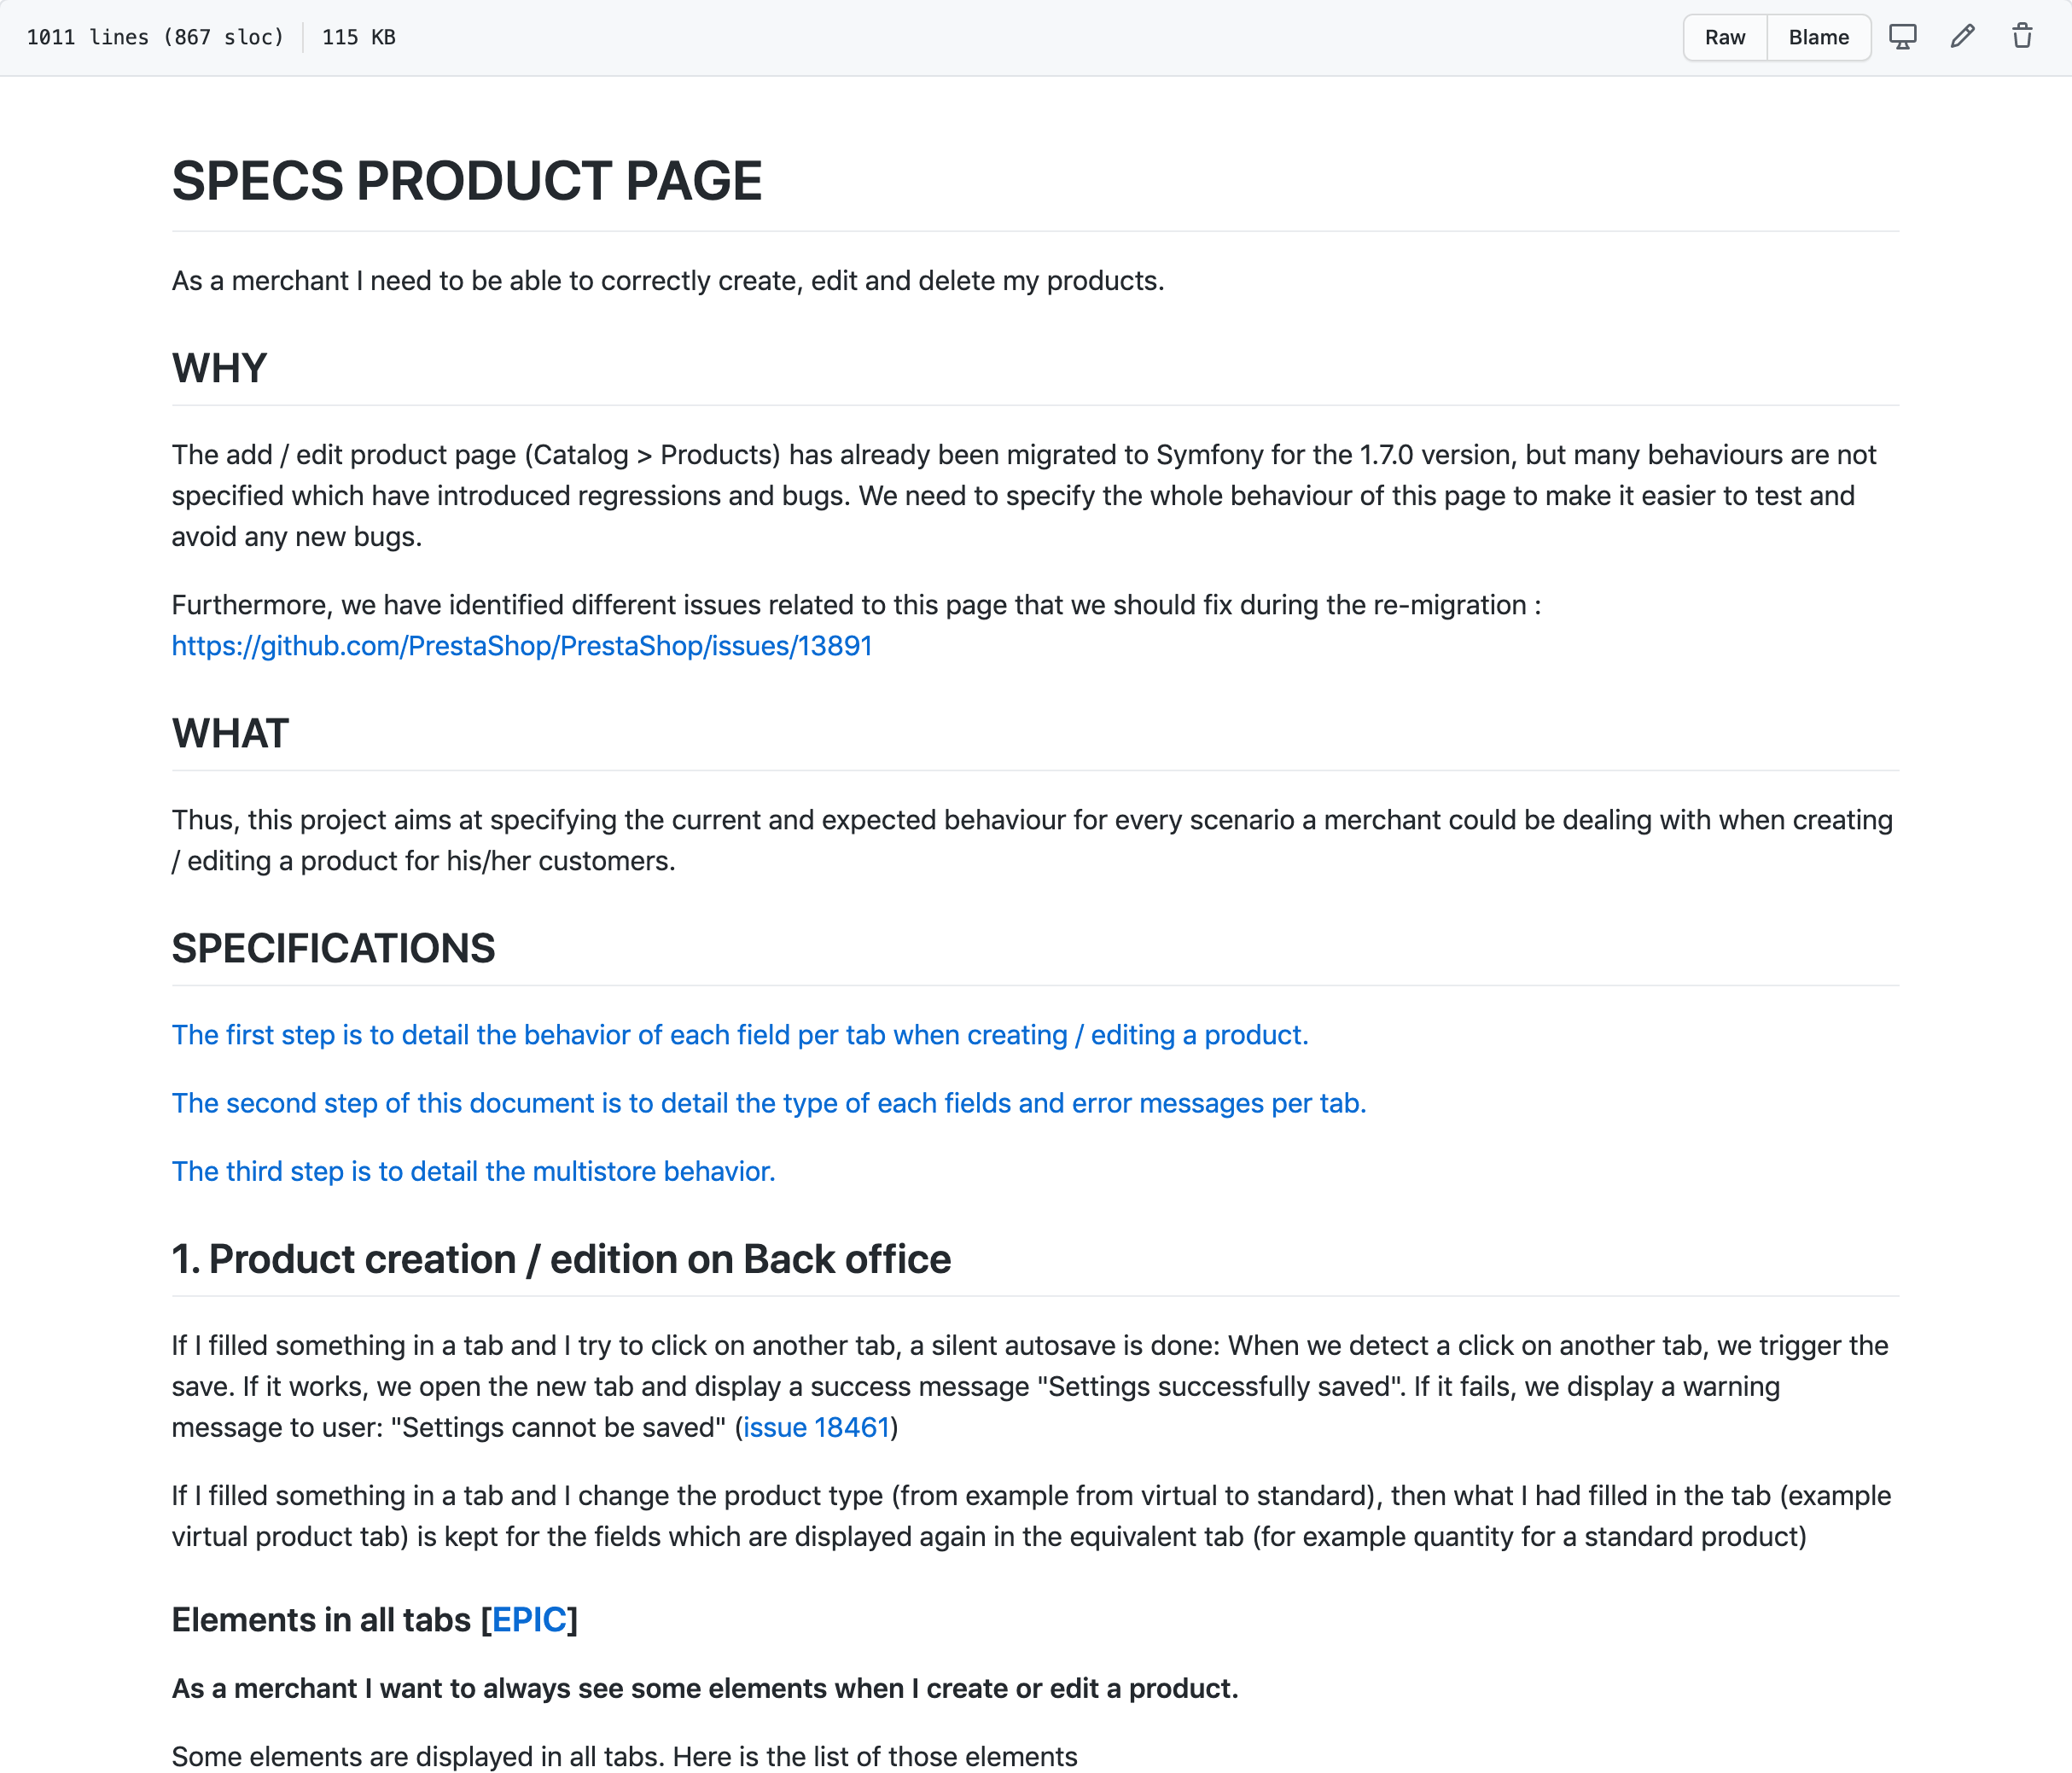 PrestaShop Product Page Specifications